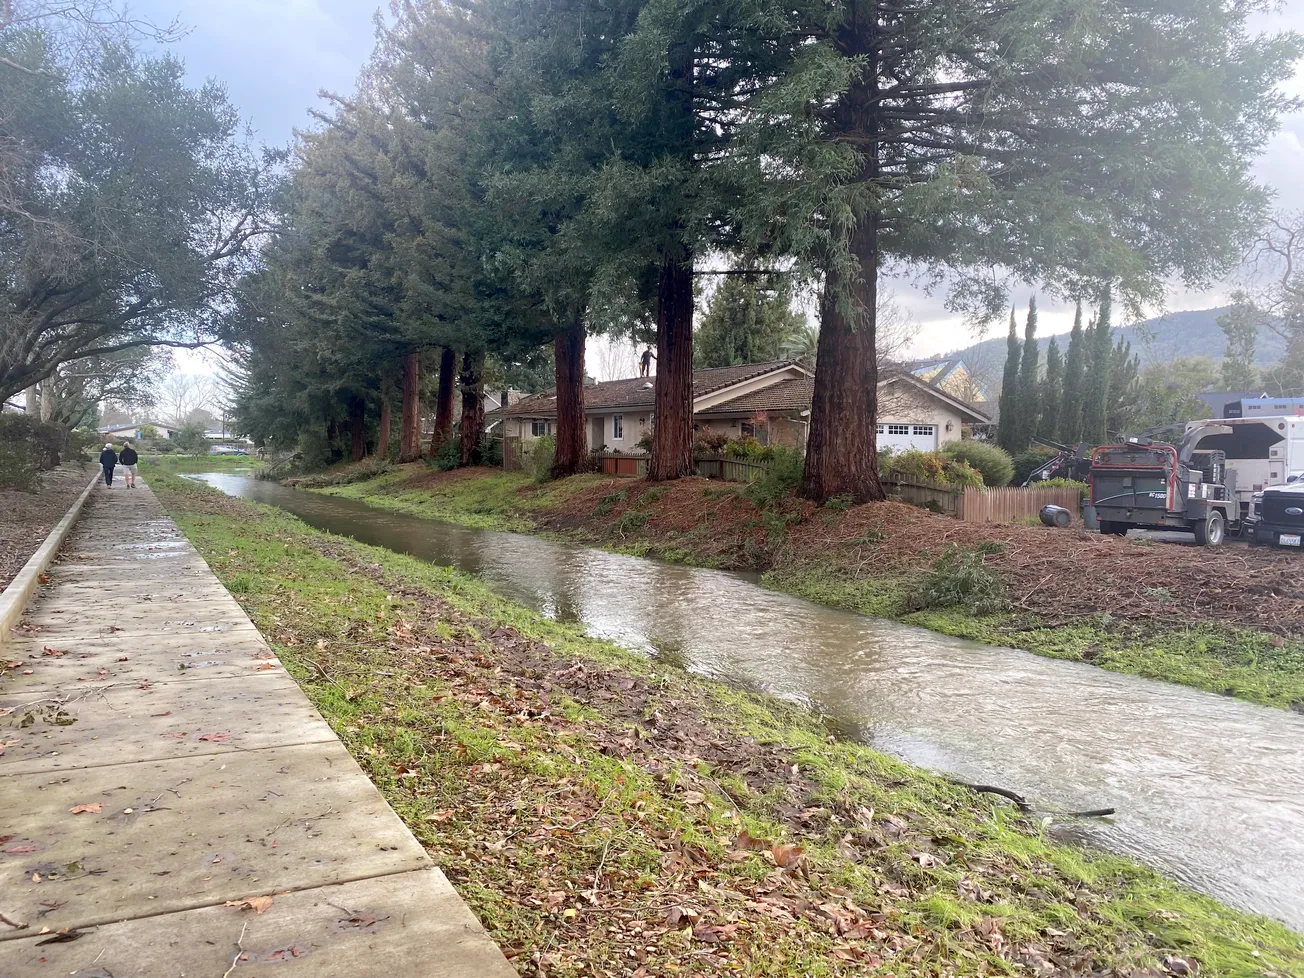 In storm aftermath, Yountville Town Council sees need for more emergency prep, self-sustainability